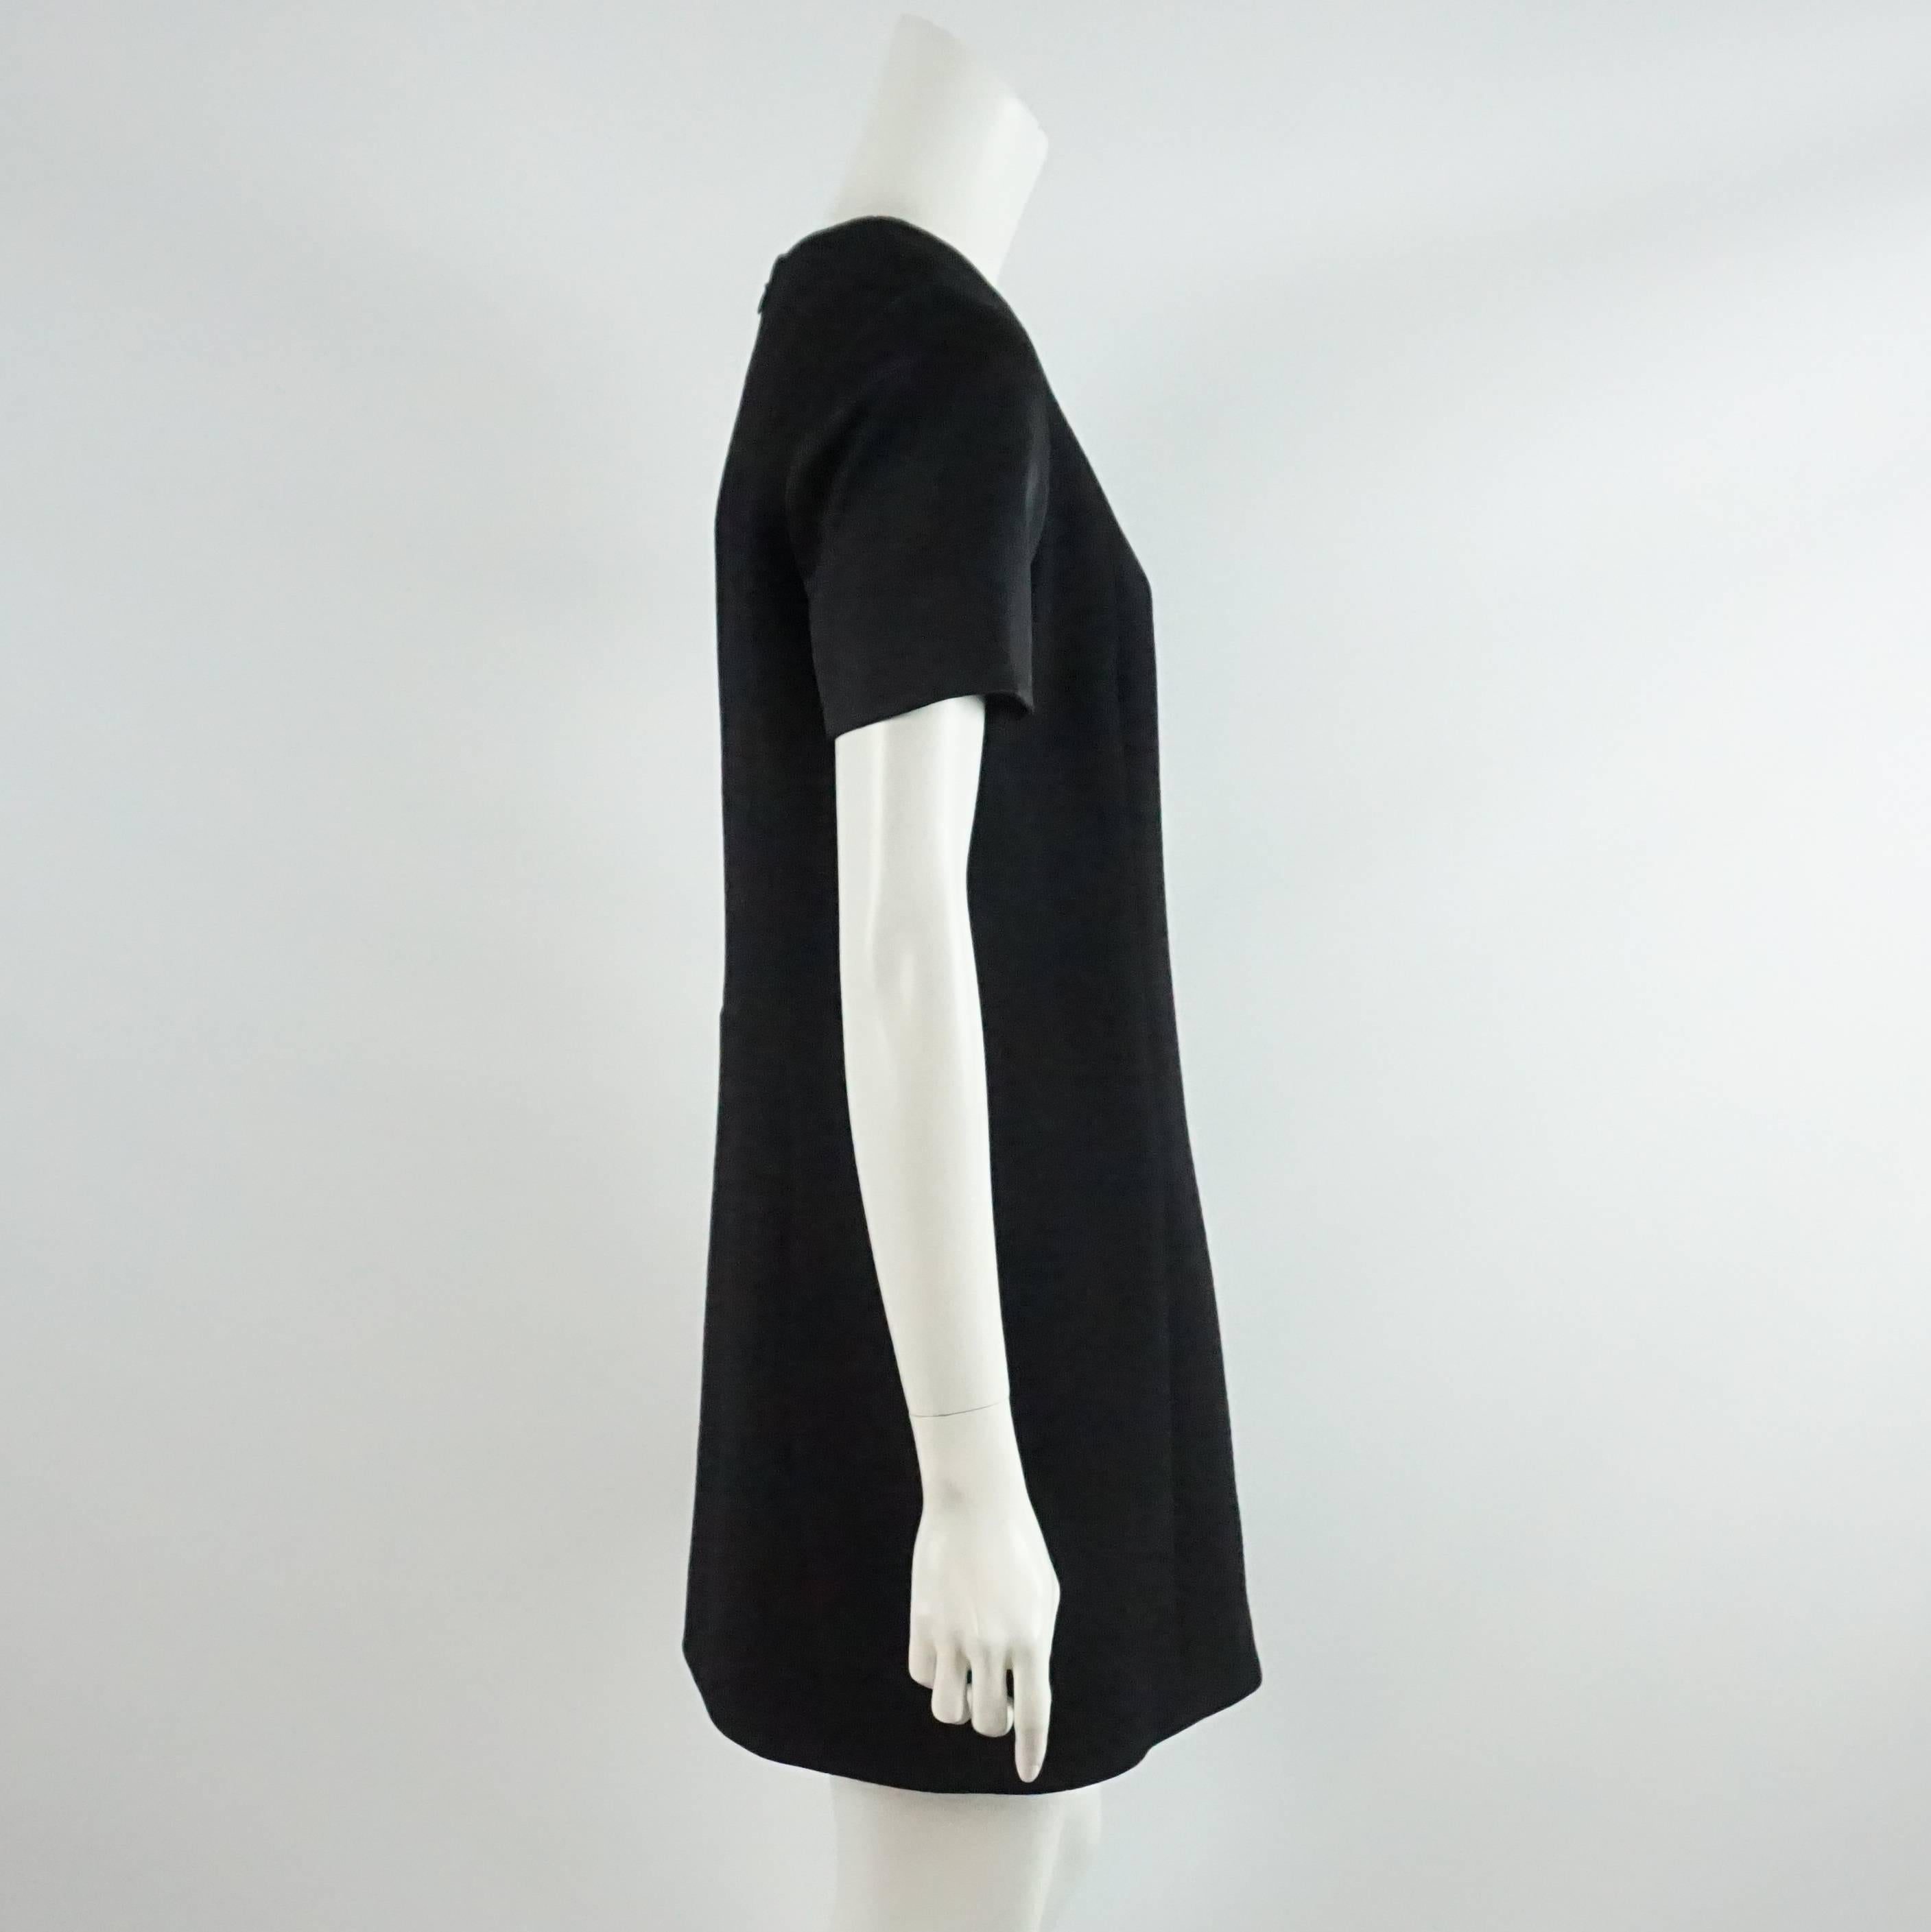 This black Celine dress is a great addition to any wardrobe. It is made of wool and has a shift cut with satin short sleeves. This dress is in excellent condition.

Measurements
Shoulder to Shoulder: 15